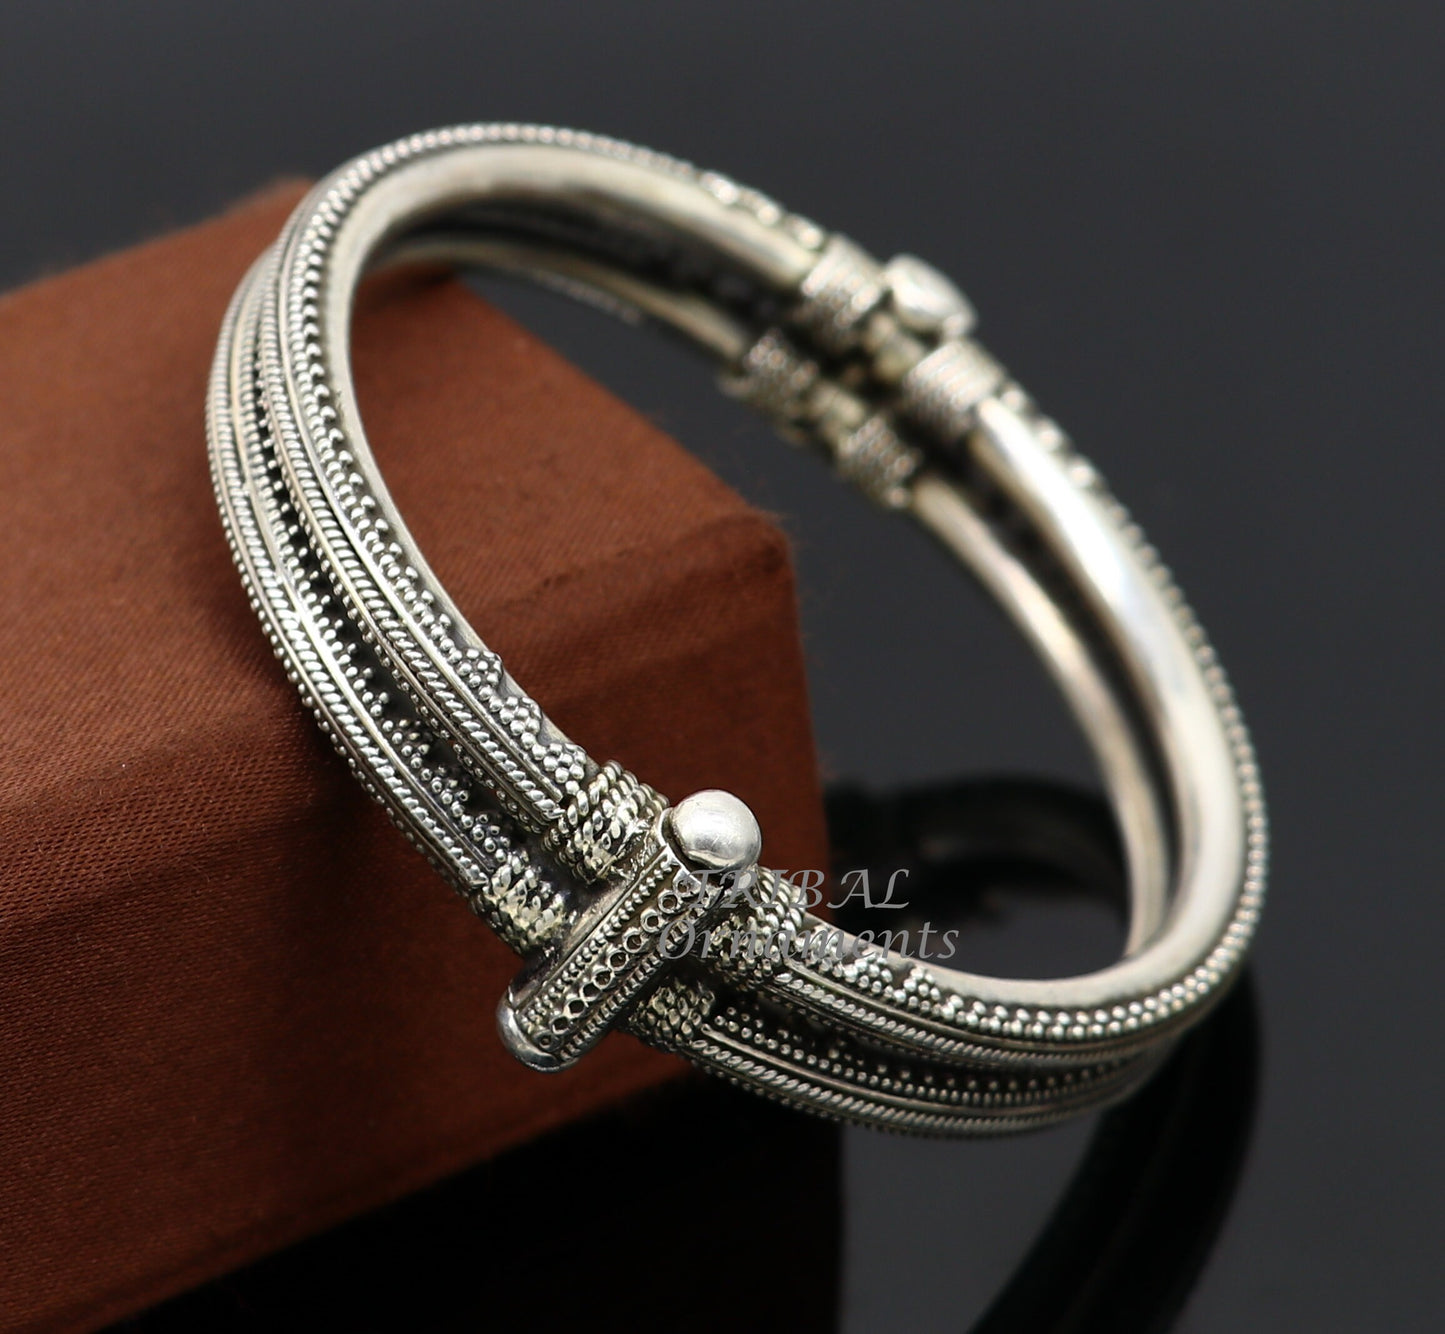 925 sterling silver vintage design handmade unique style kada bangle, best ethnic tribal jewelry from india nsk570 - TRIBAL ORNAMENTS